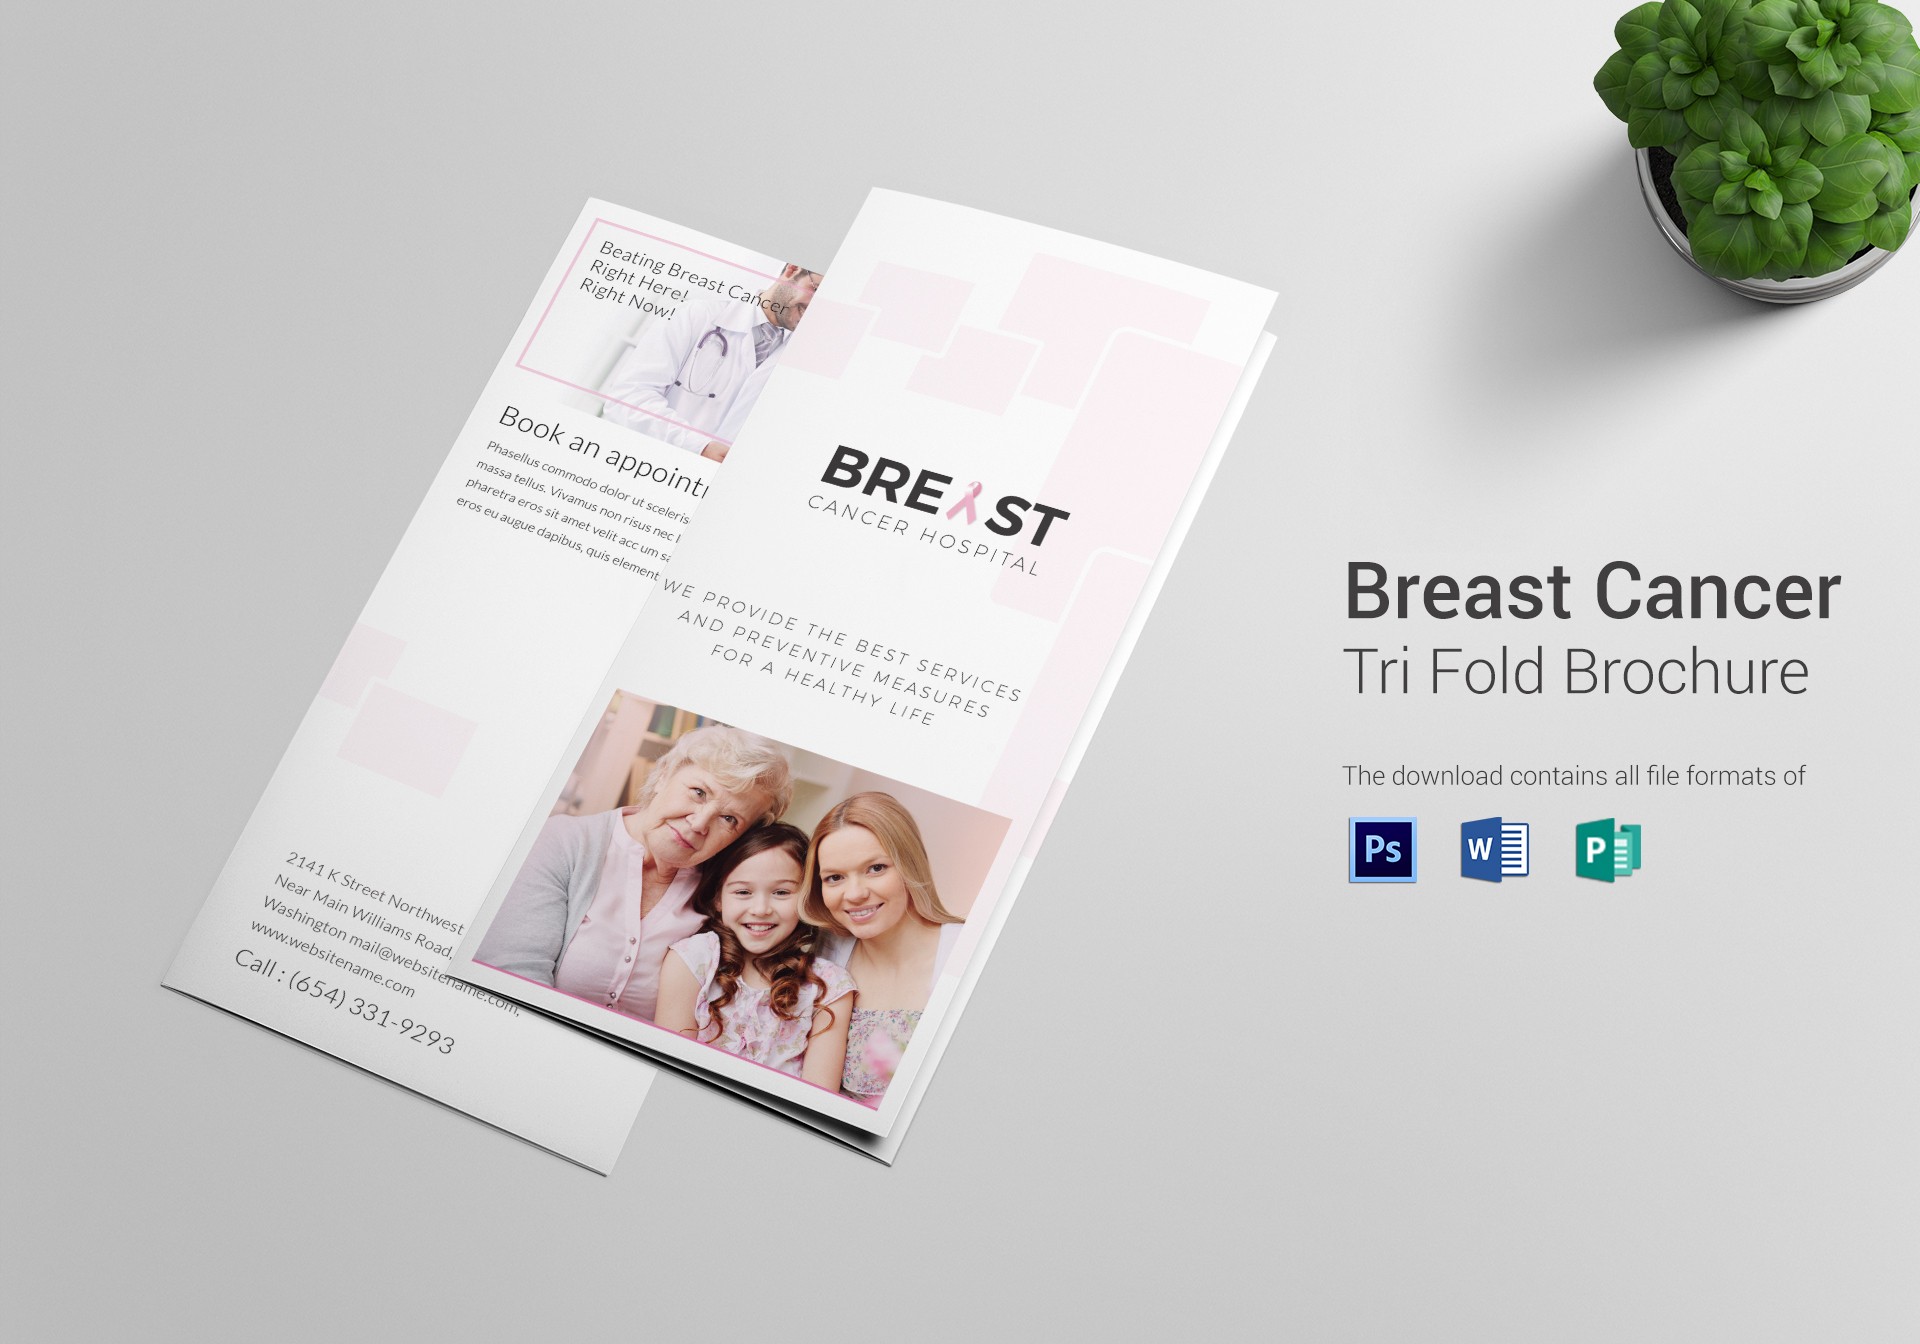 Breast Cancer Tri Fold Brochure Design Template In Word PSD Publisher